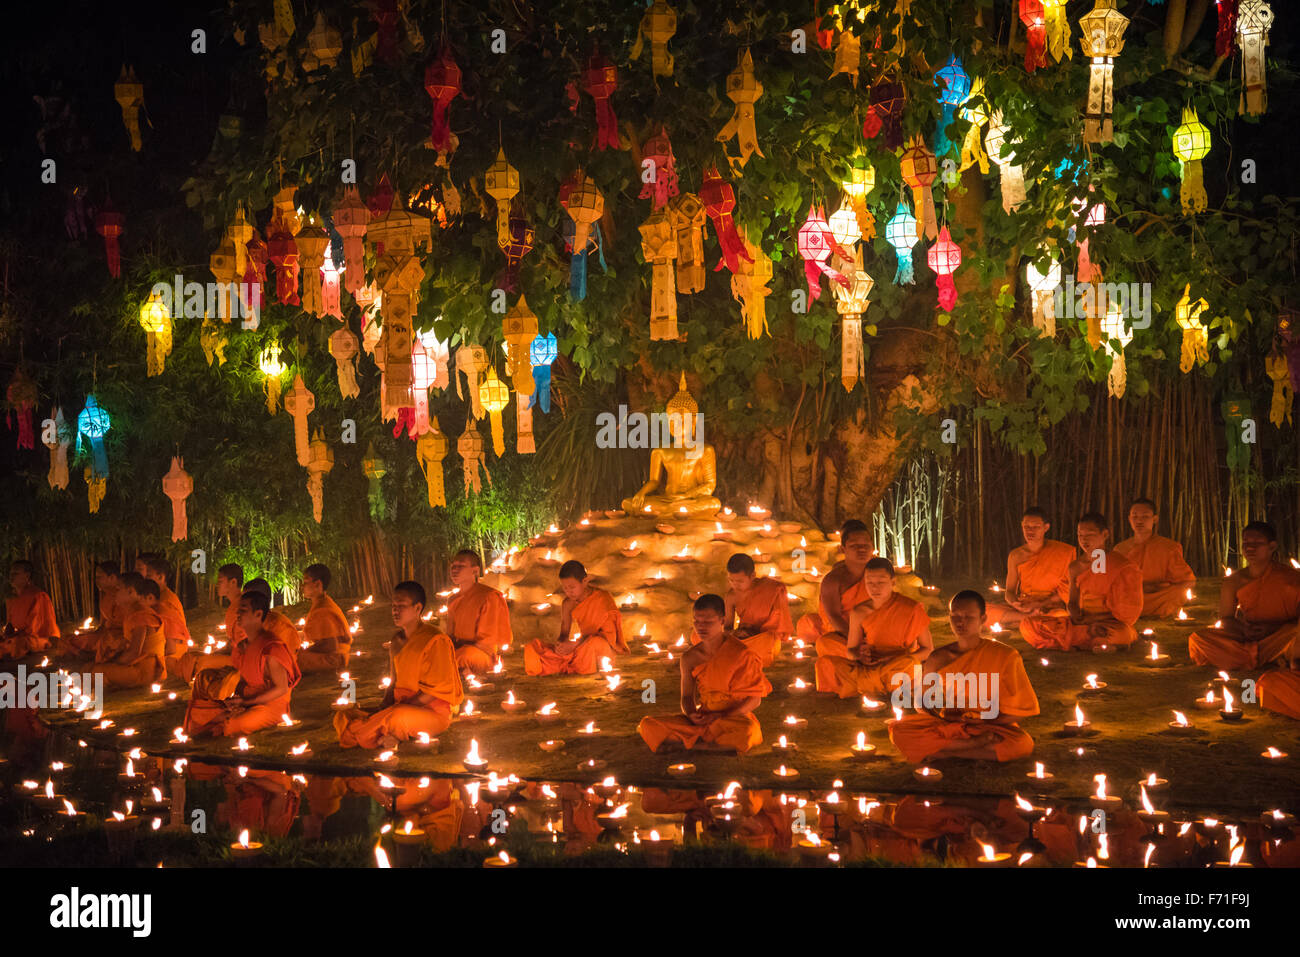 Monks meditation near the pond in Loy Krathong festival at Wat Phan Tao temple. Chiang Mai, Thailand. Stock Photo